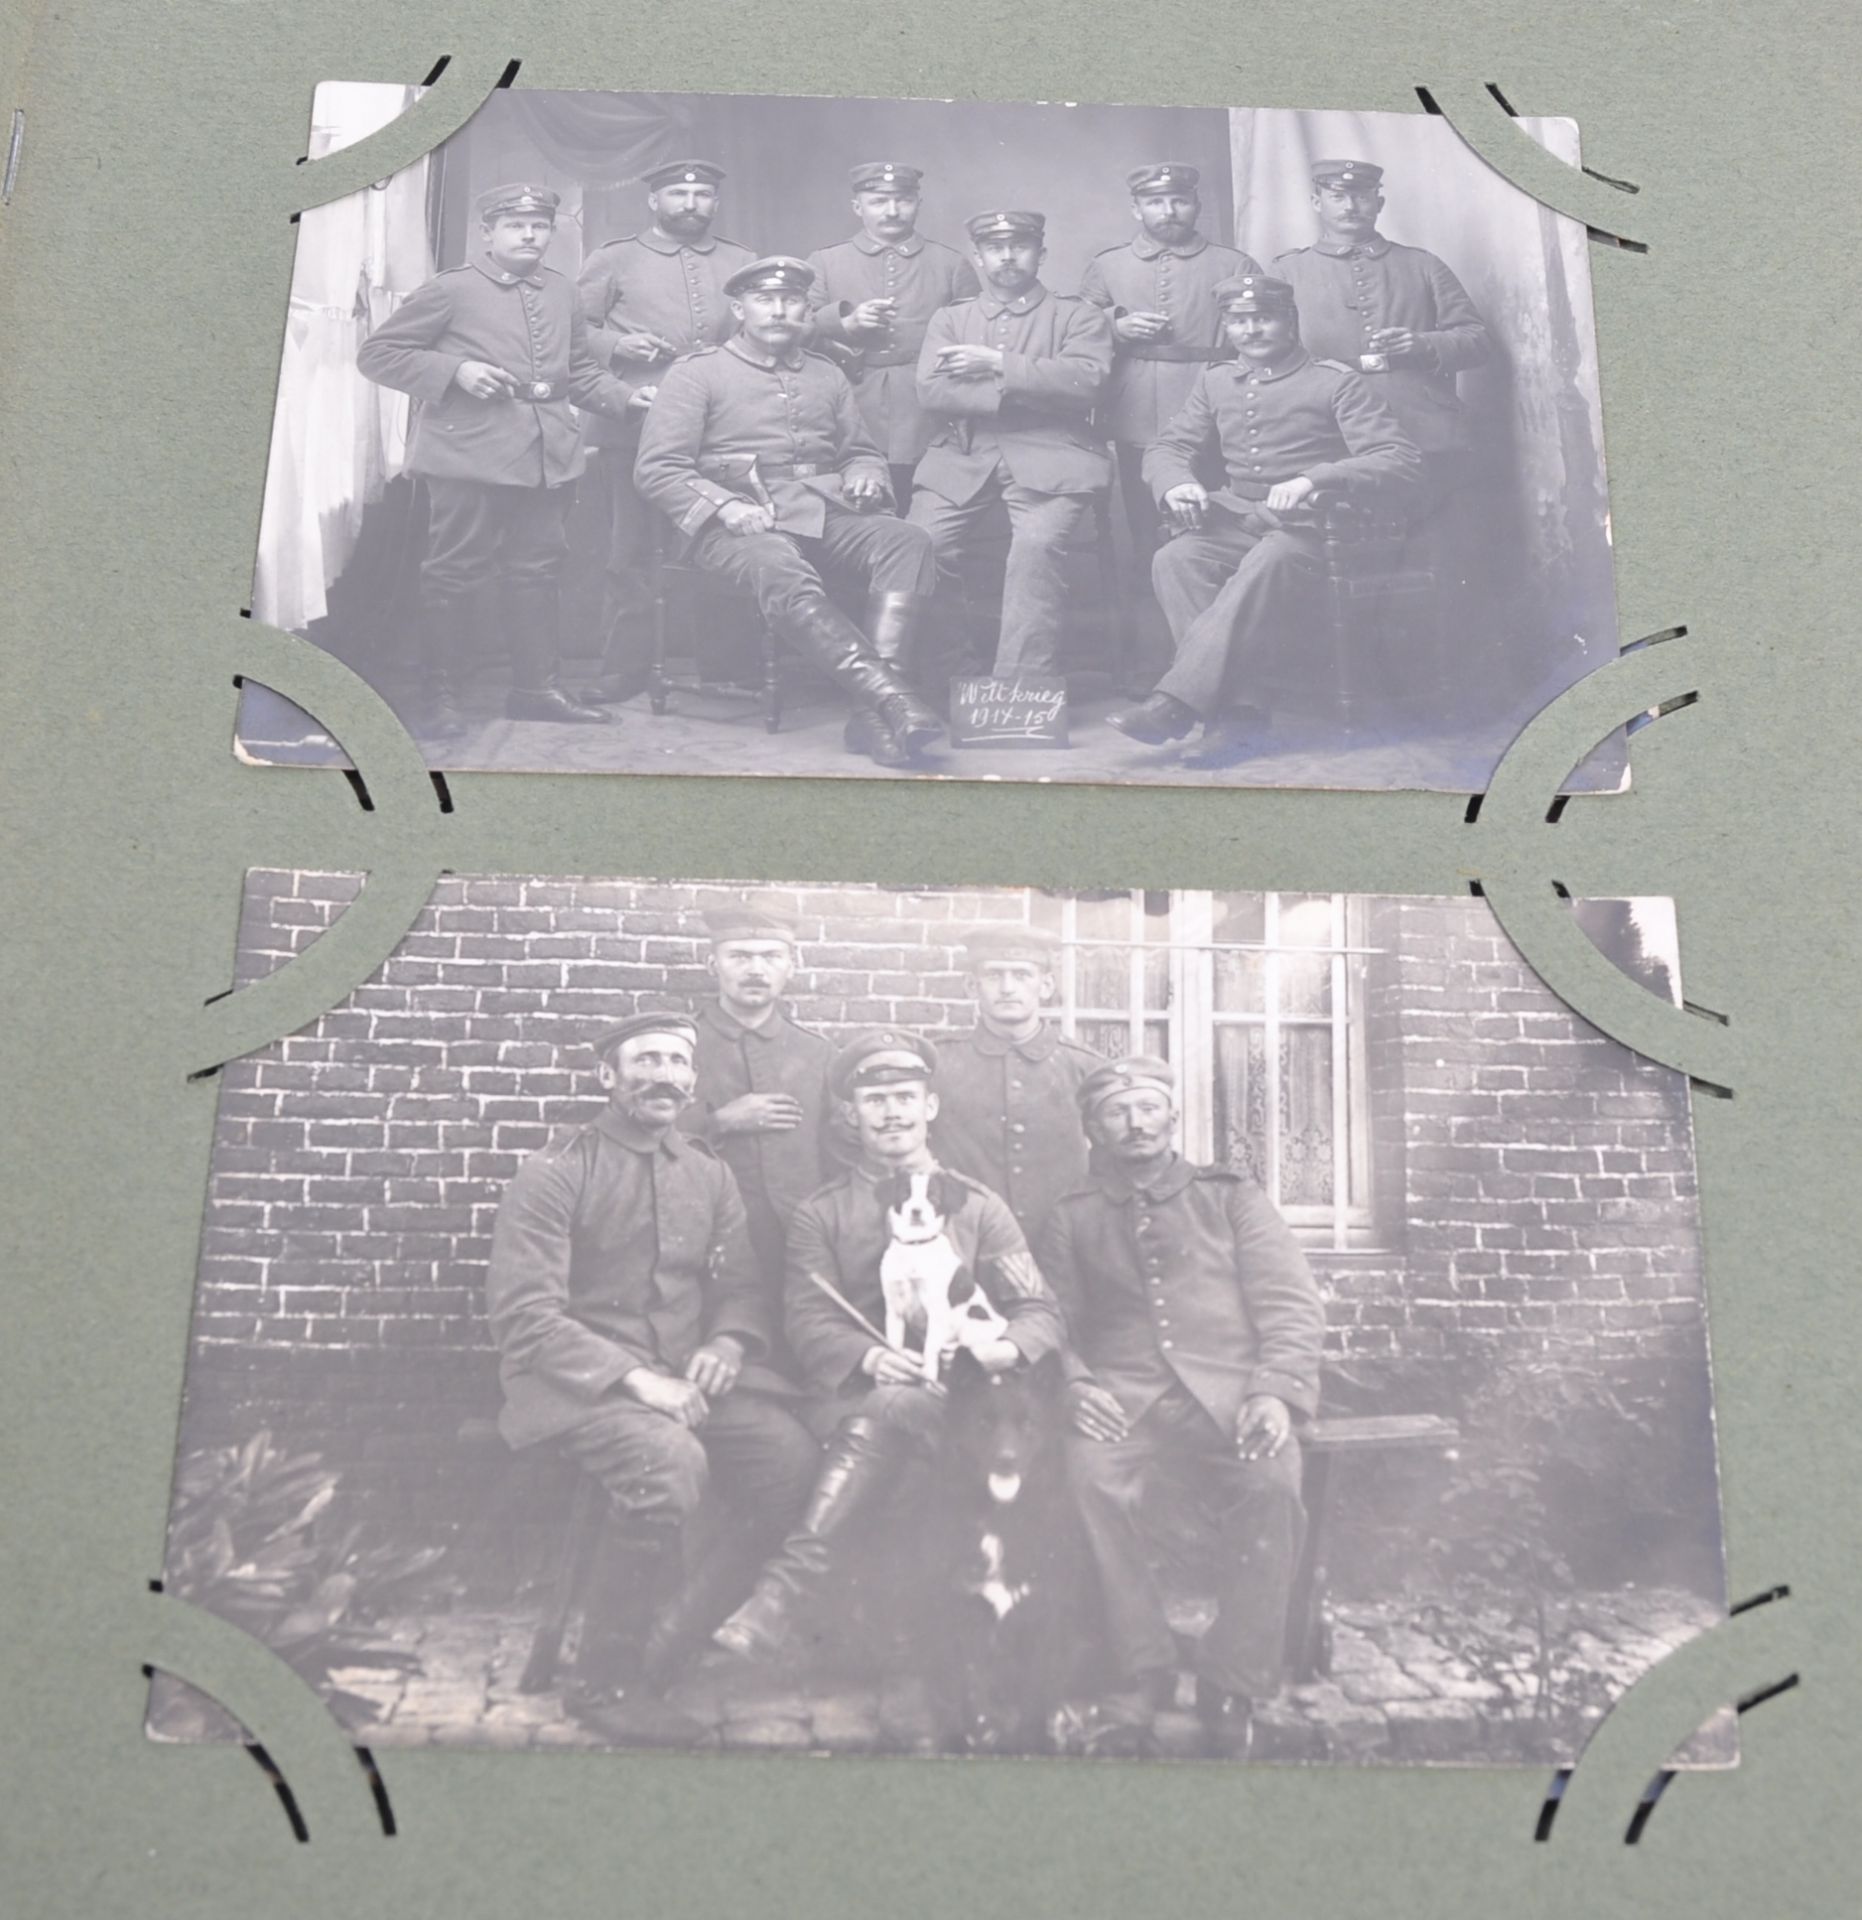 WWI FIRST WORLD WAR REAL PHOTOGRAPH POSTCARD / PHOTO ALBUM - Image 8 of 11